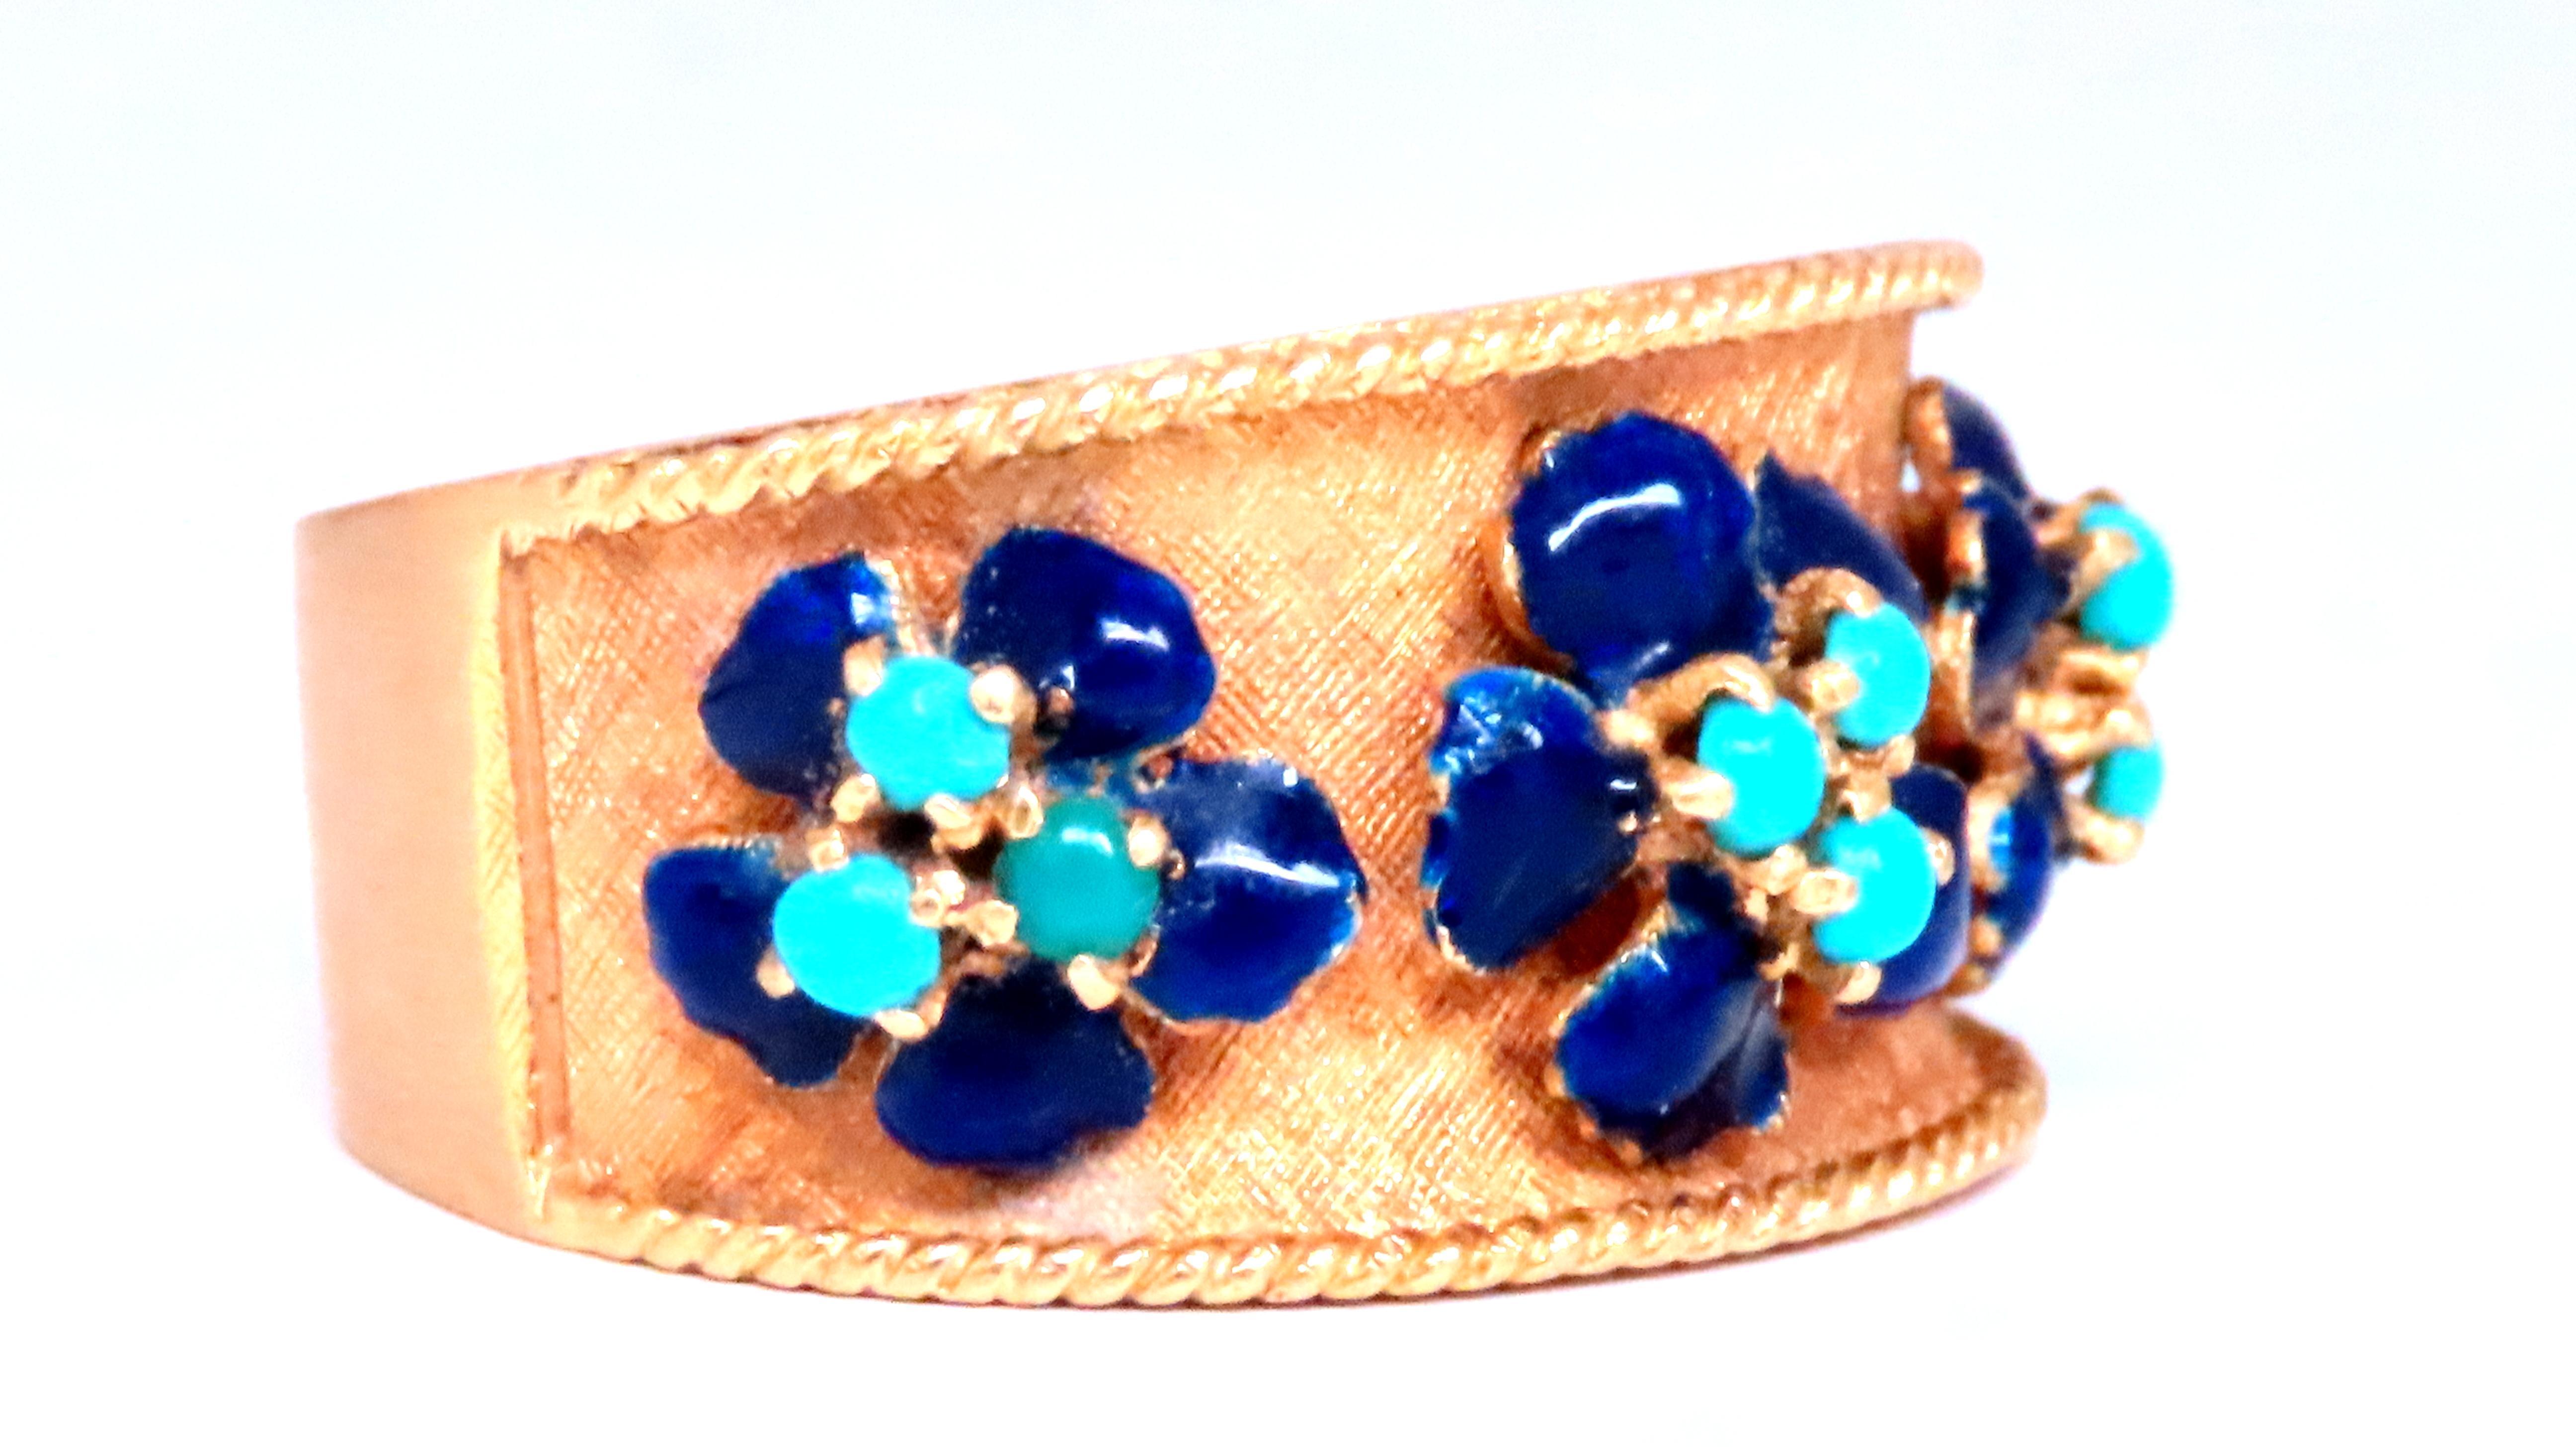 Vintage Turquoise Ring

.50ct Cabachon Turquoise 

Blue Enamel On Daisy Petals

18kt Yellow Gold

7.5 Grams

Size 4.5

Ring is 10mm wide
3mm depth